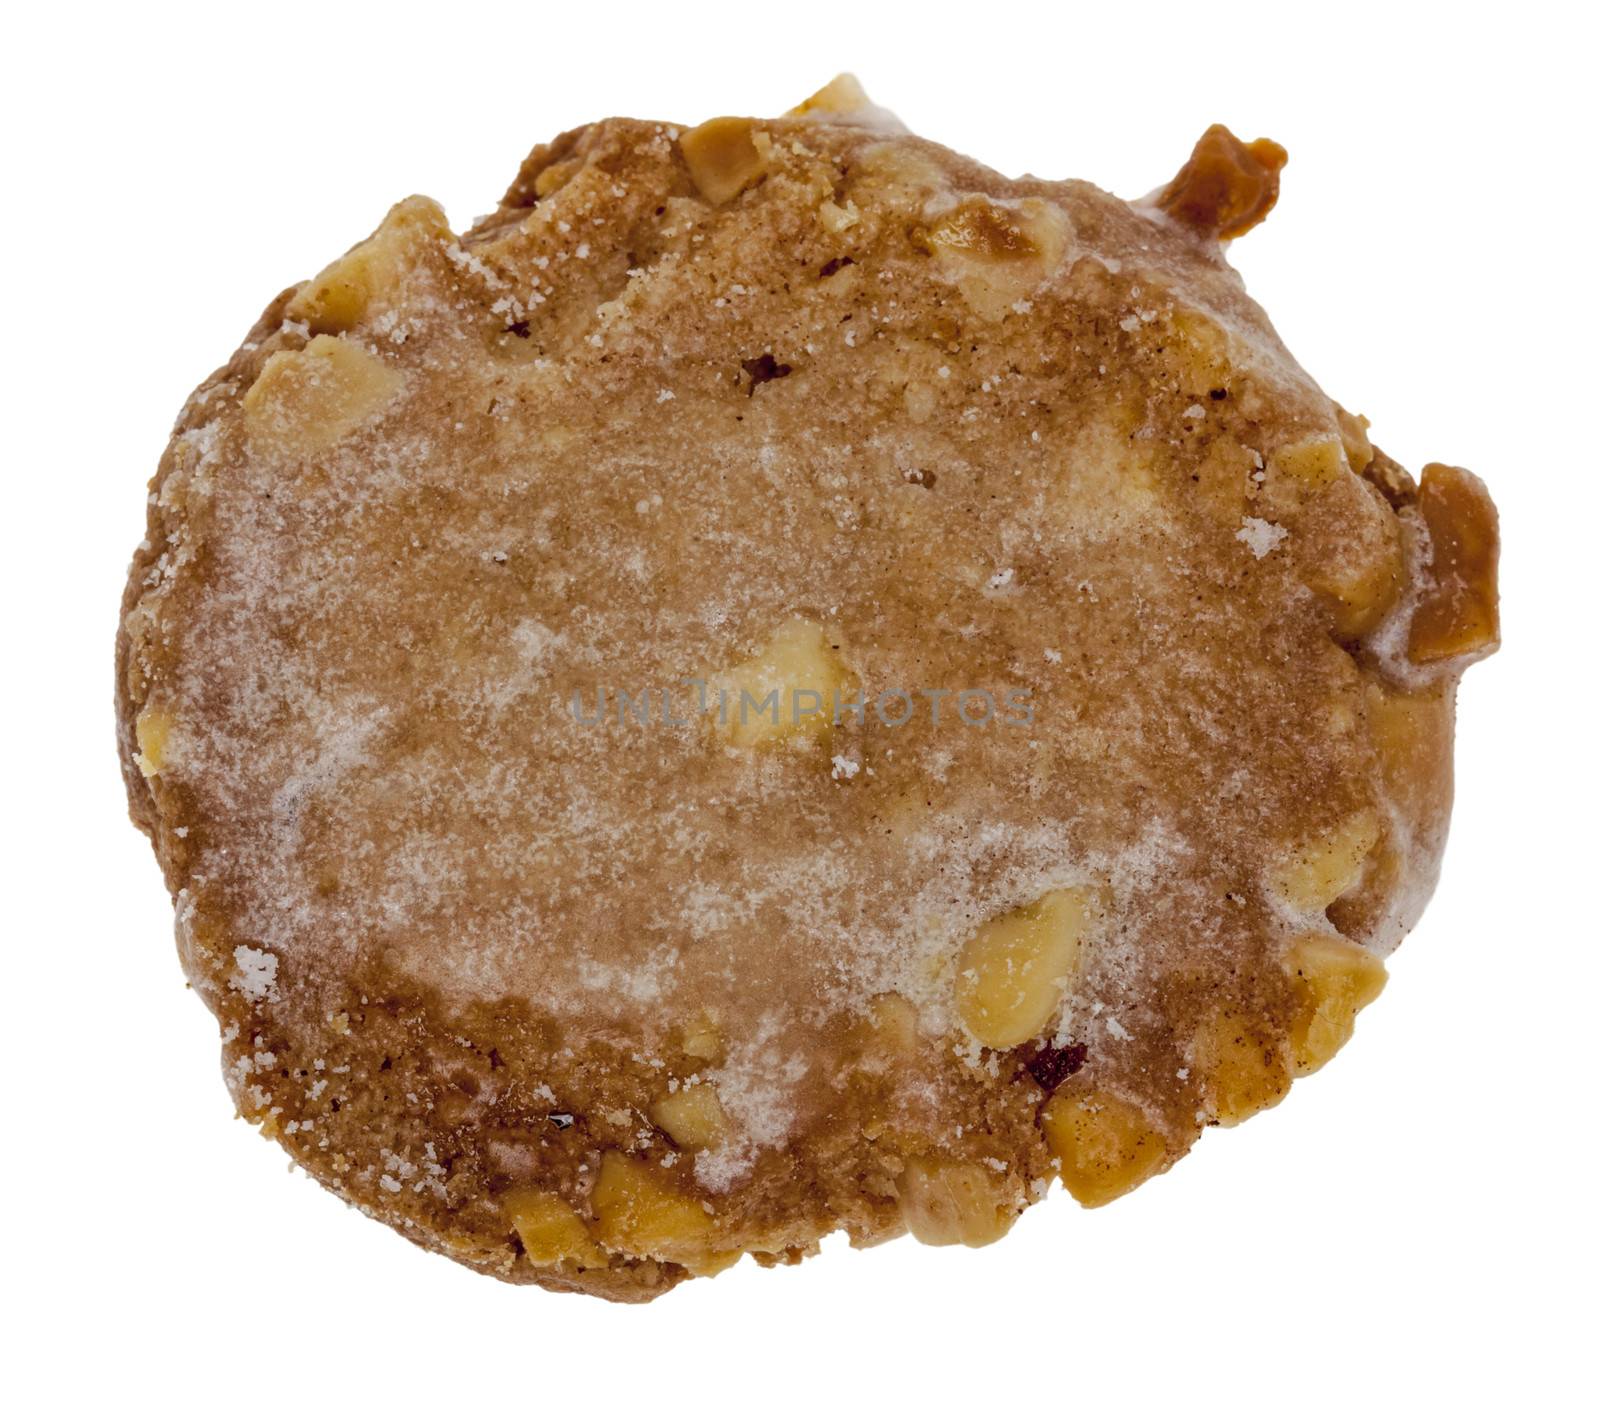 Upper view of a cookie ,isolated against a white background.